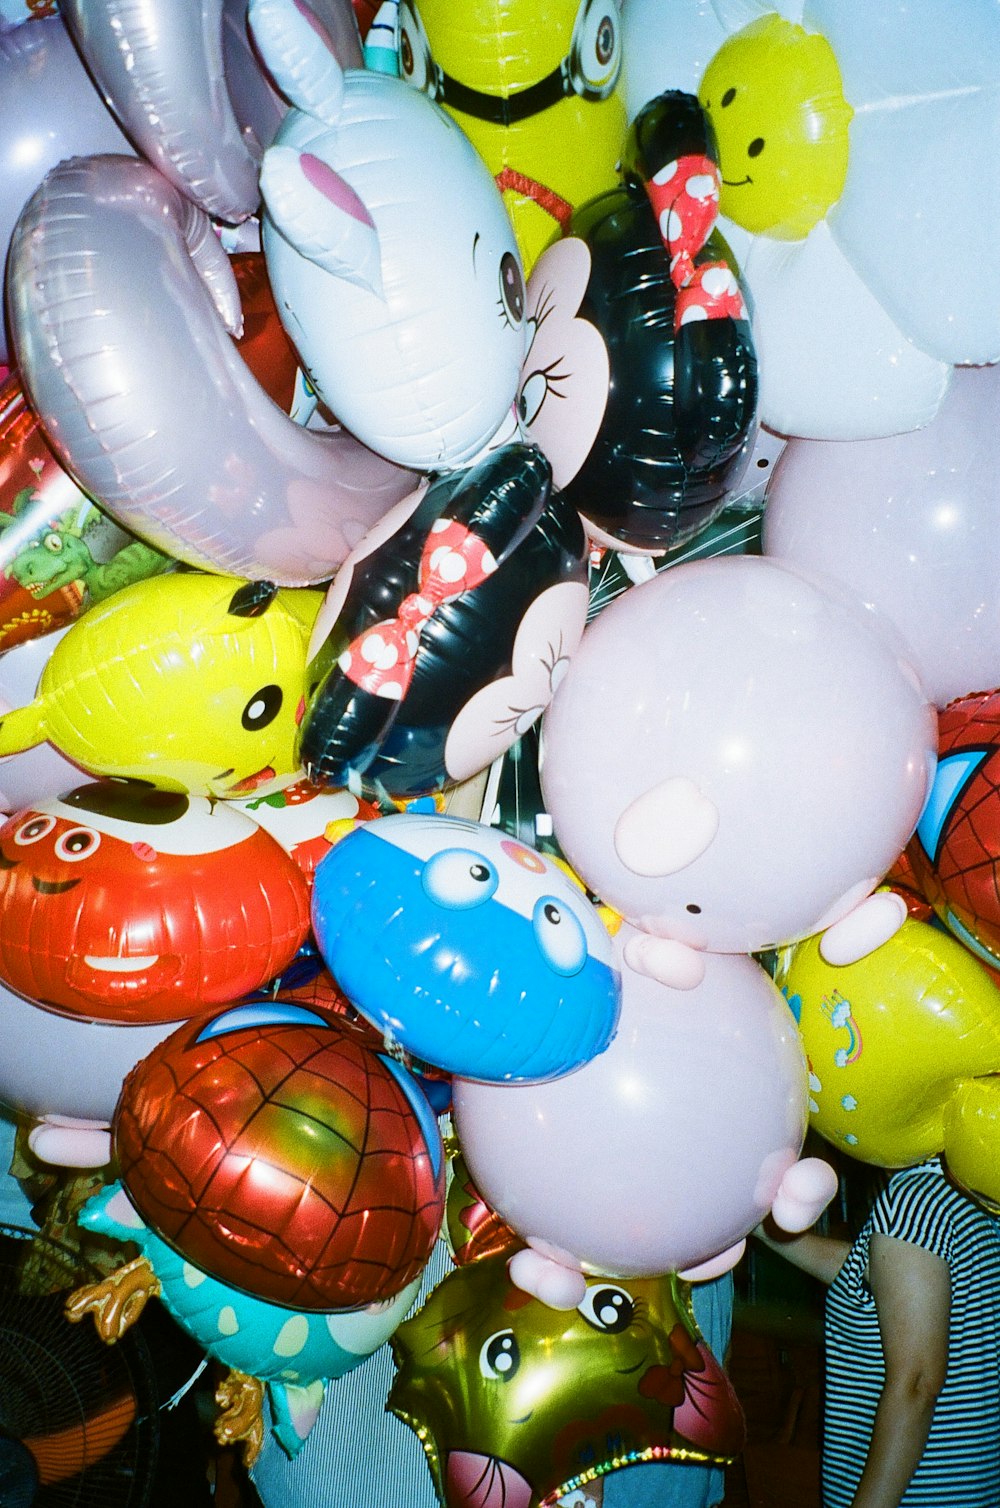 a bunch of balloons that are in the shape of animals